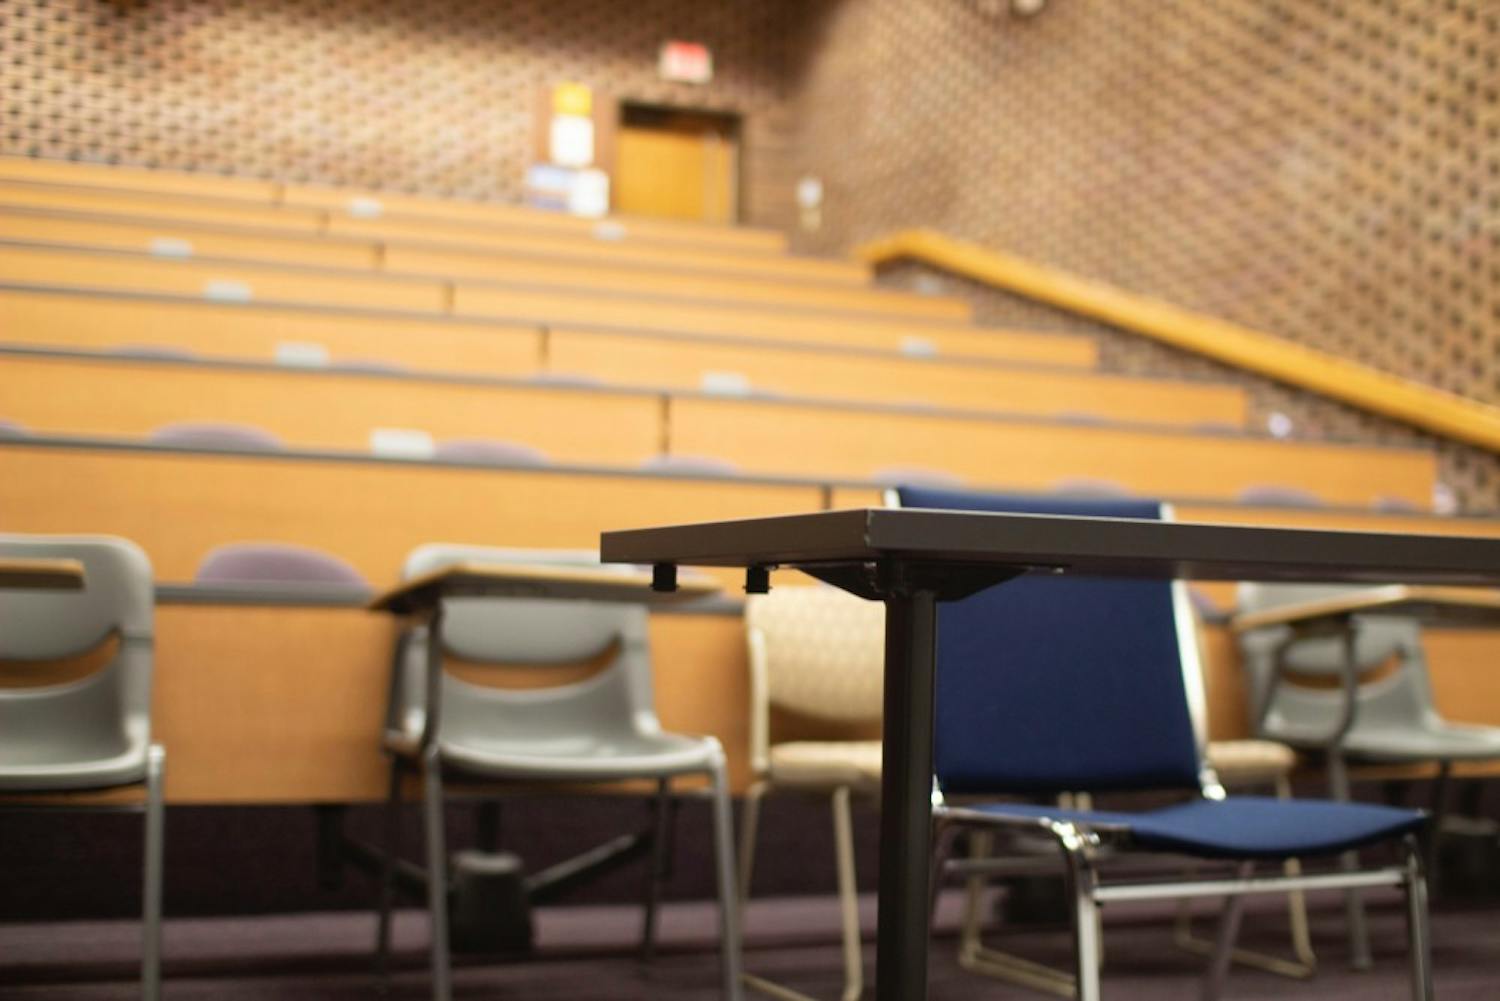 The classrooms in O’Brian Hall have the accessible seating at the bottom of a flight of stairs with no accessible entrance at the bottom of the lecture halls.